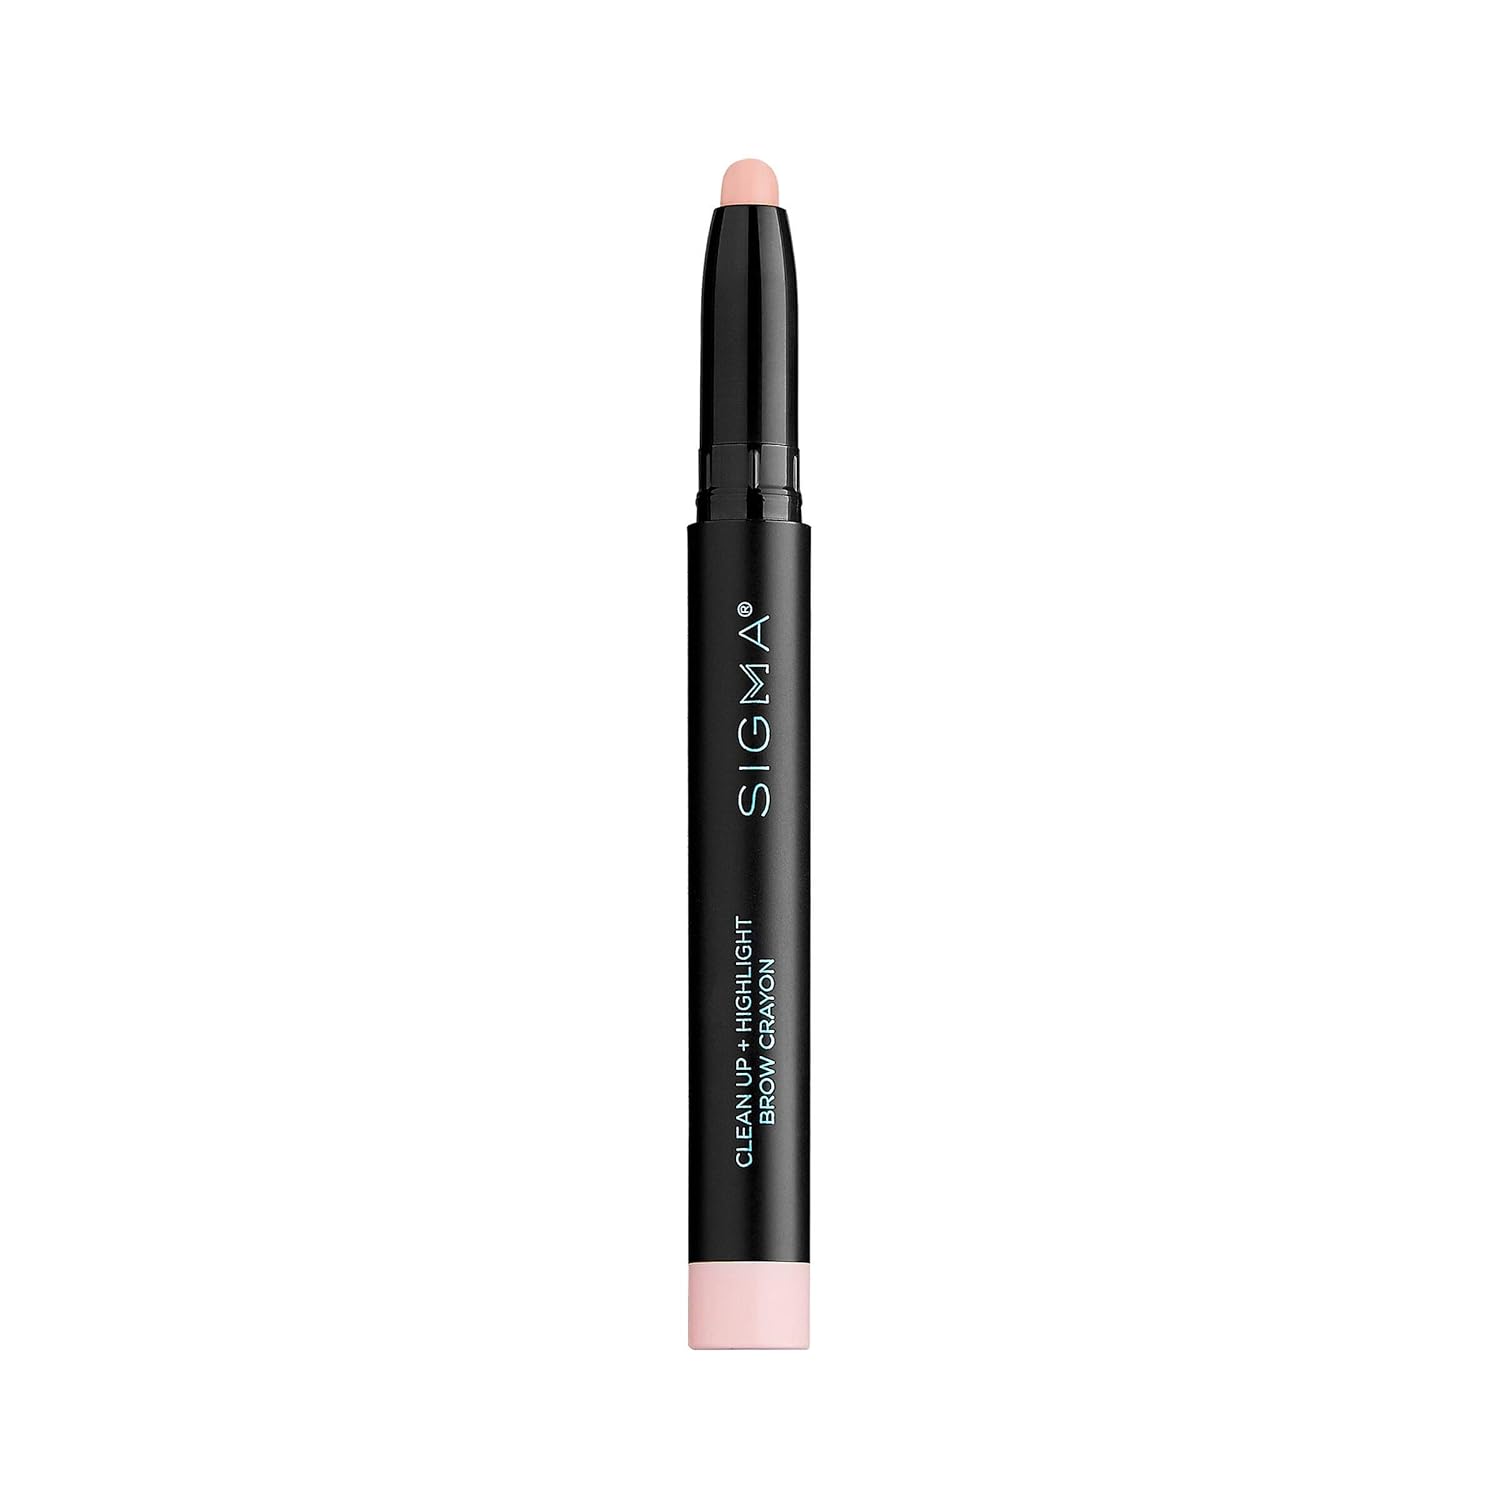 Sigma Beauty Clean Up + Highlight Brow Crayon - Matte Light Pink - Creamy, Blendable Brow Highlighter for Brow Bone and Inner Corner of Eye - ash